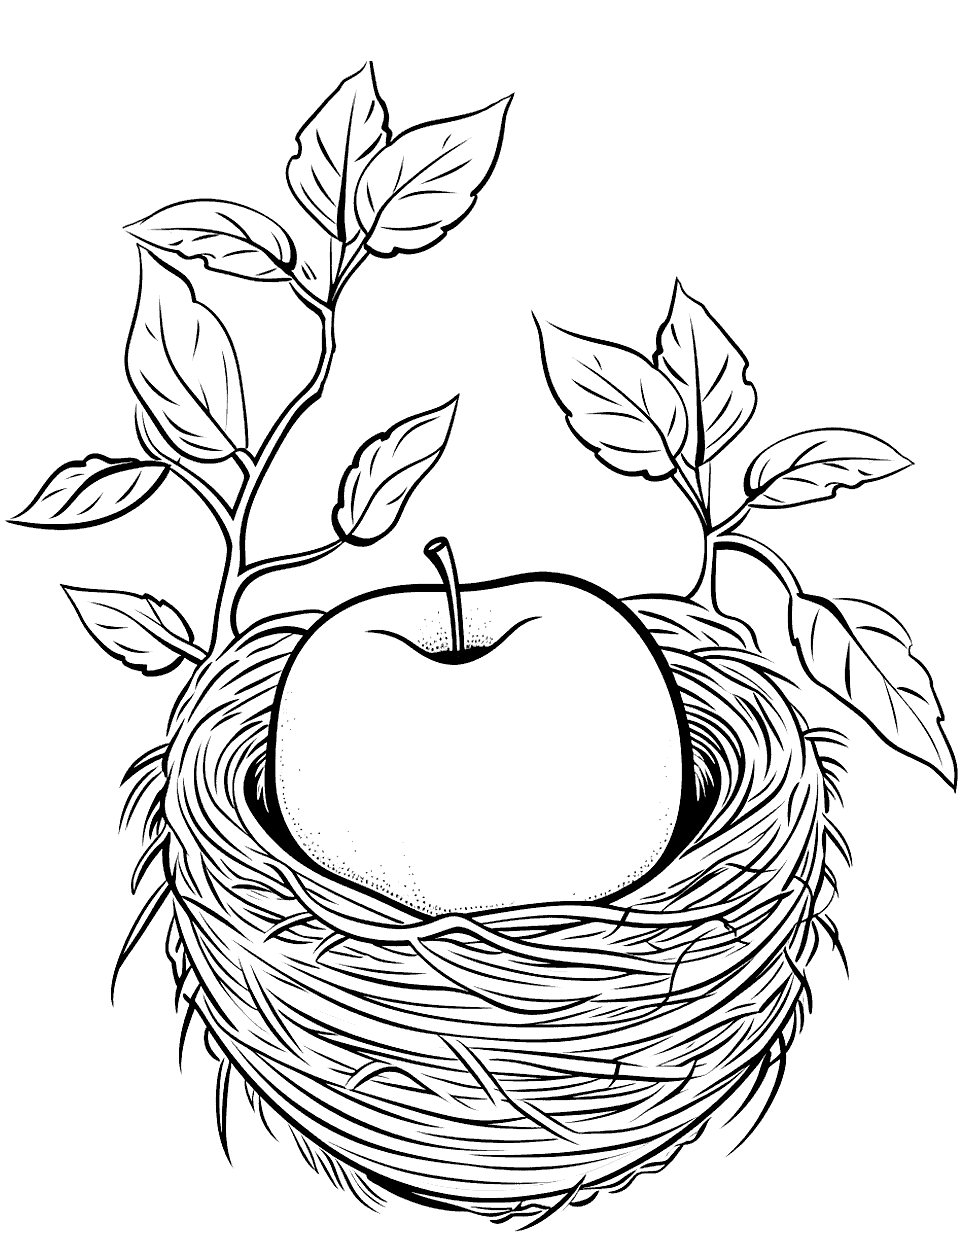 Apple in a Bird’s Nest Coloring Page - A surprising scene of an apple resting in a bird’s nest.